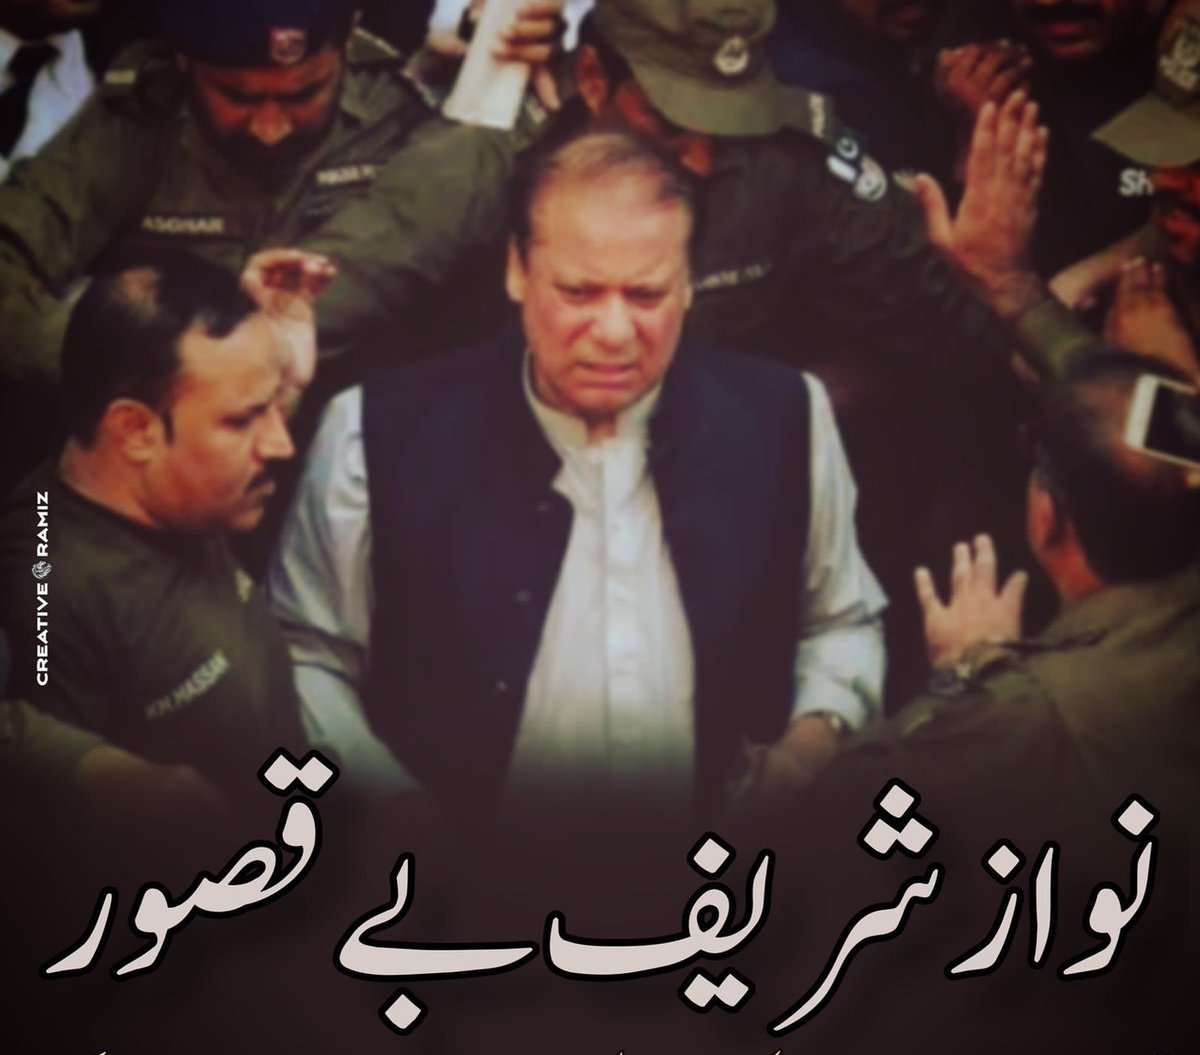 The veil of injustice is lifted! Nawaz Sharif innocence shines bright as the baseless cases against him collapse. The game to keep him away from politics has been unmasked. #قائد_نوازشریف_سرخرو